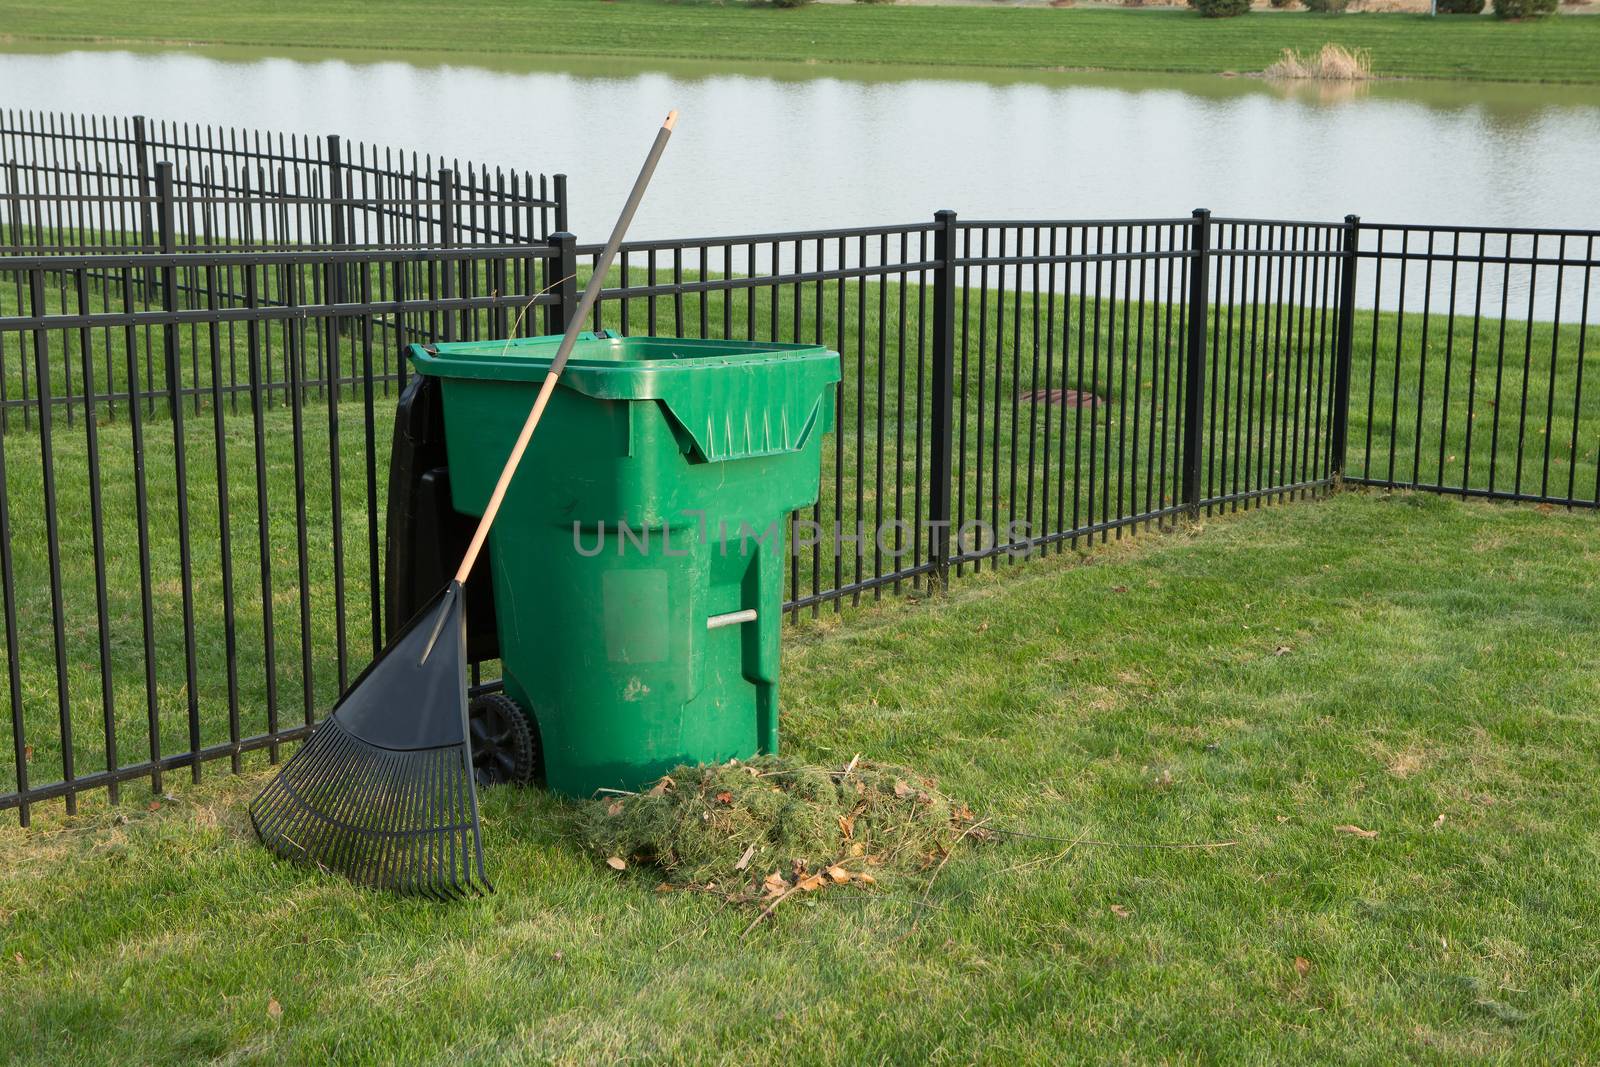 Yard maintenance in spring with a fresh heap of grass clippings and a rake leaning on a green plastic bin for composting organic waste on a neat lawn with wrought iron fence above a lake